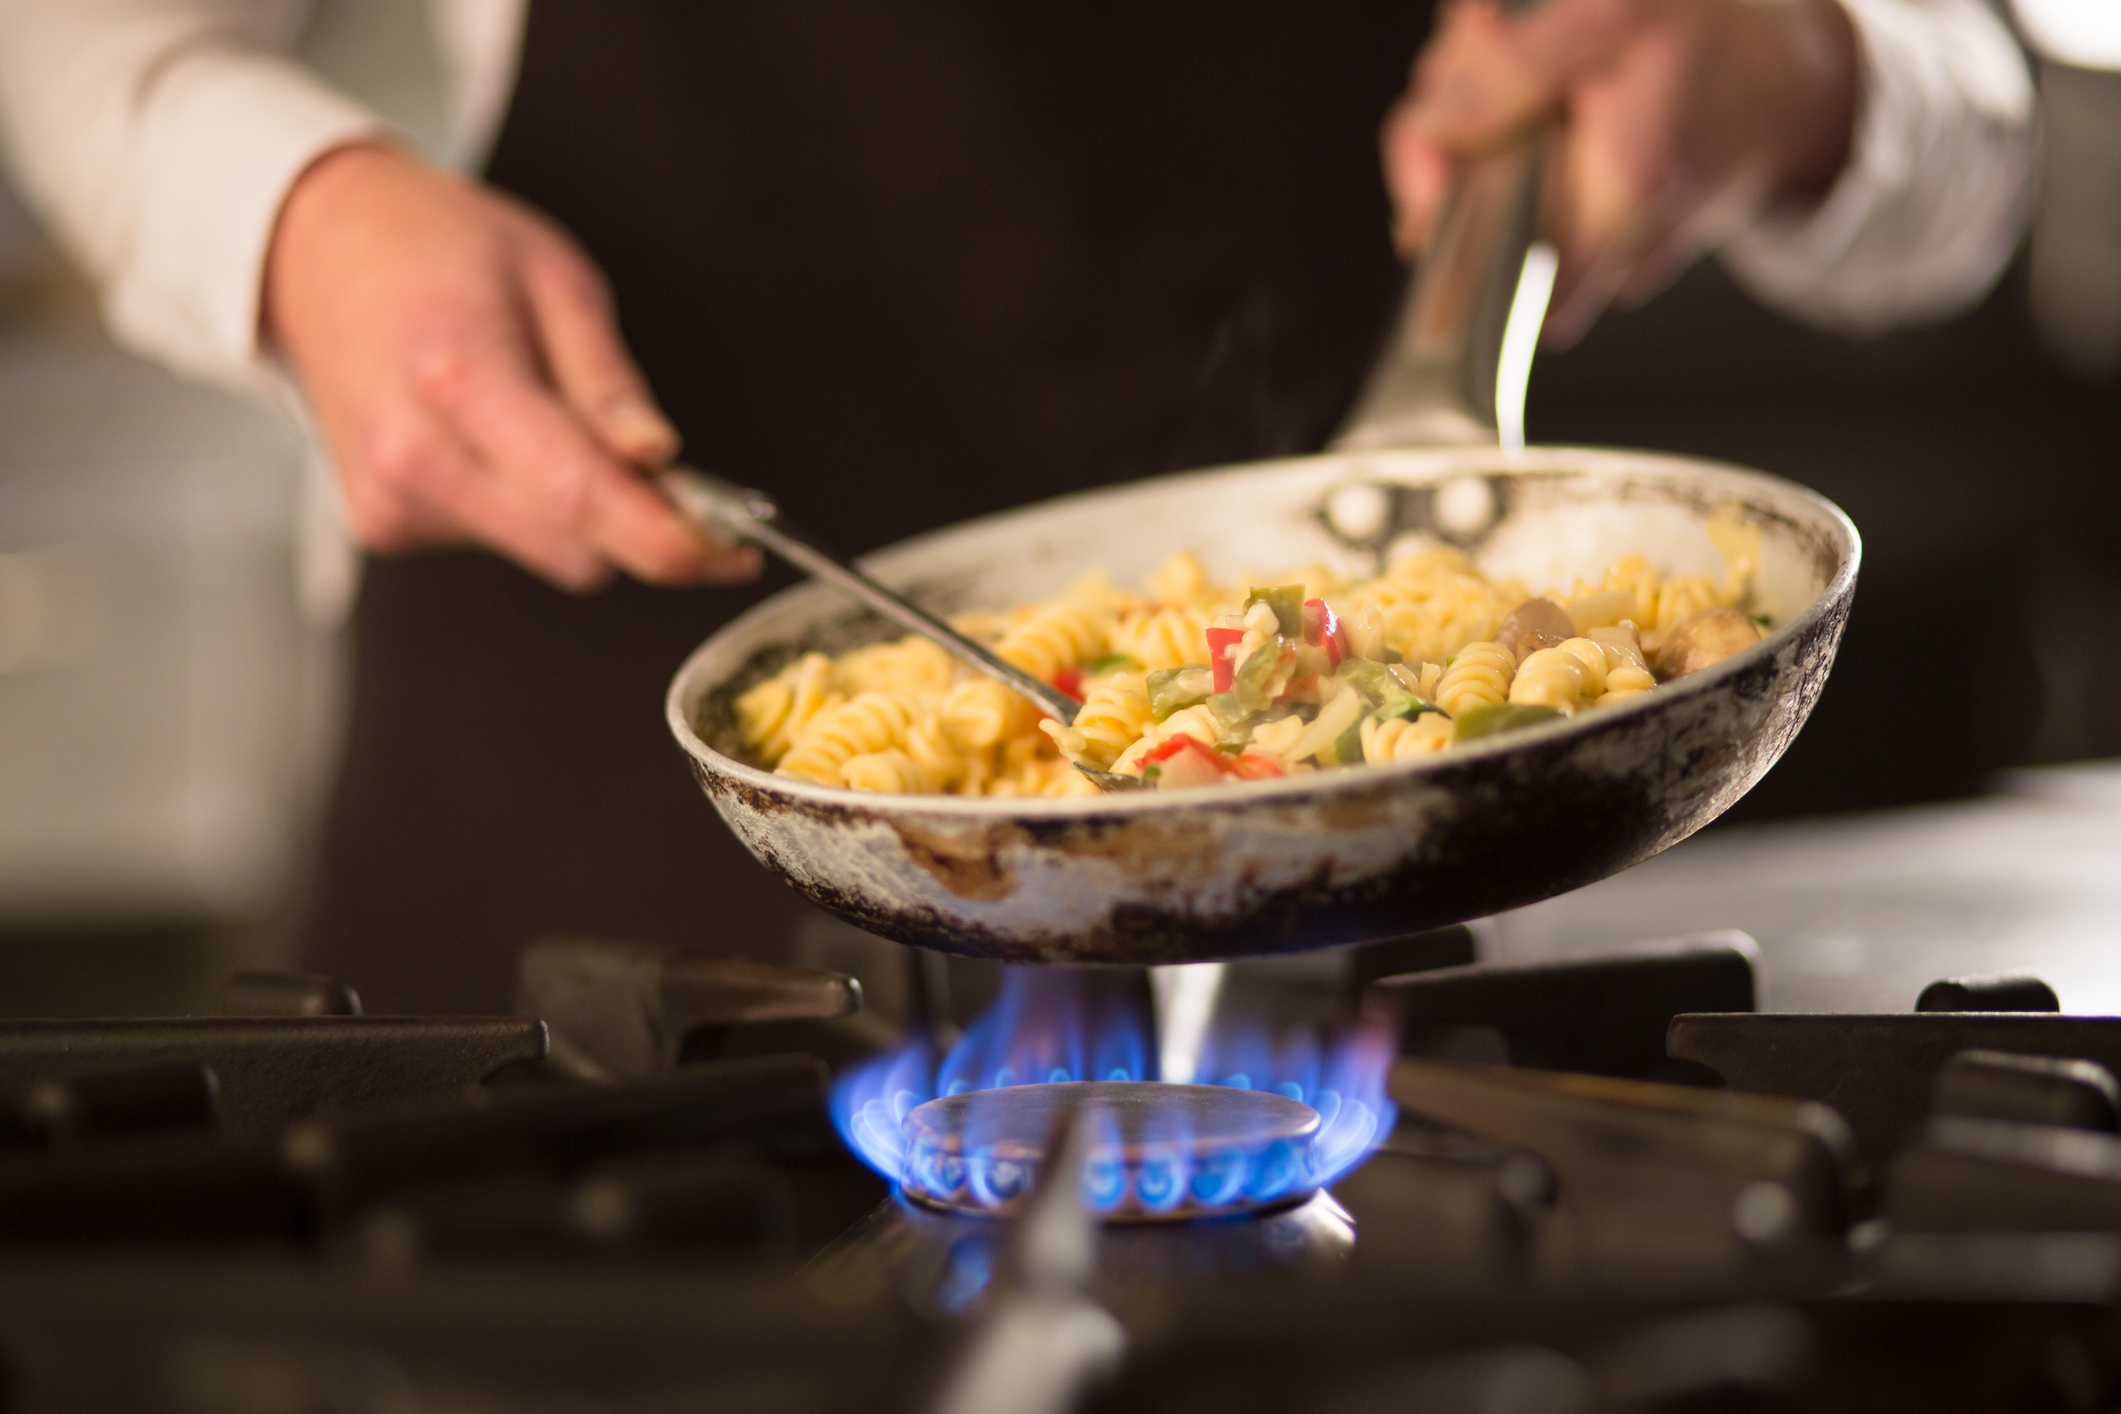 Cooking Pasta Al Dente Could Help You Lose Weight, Study Finds